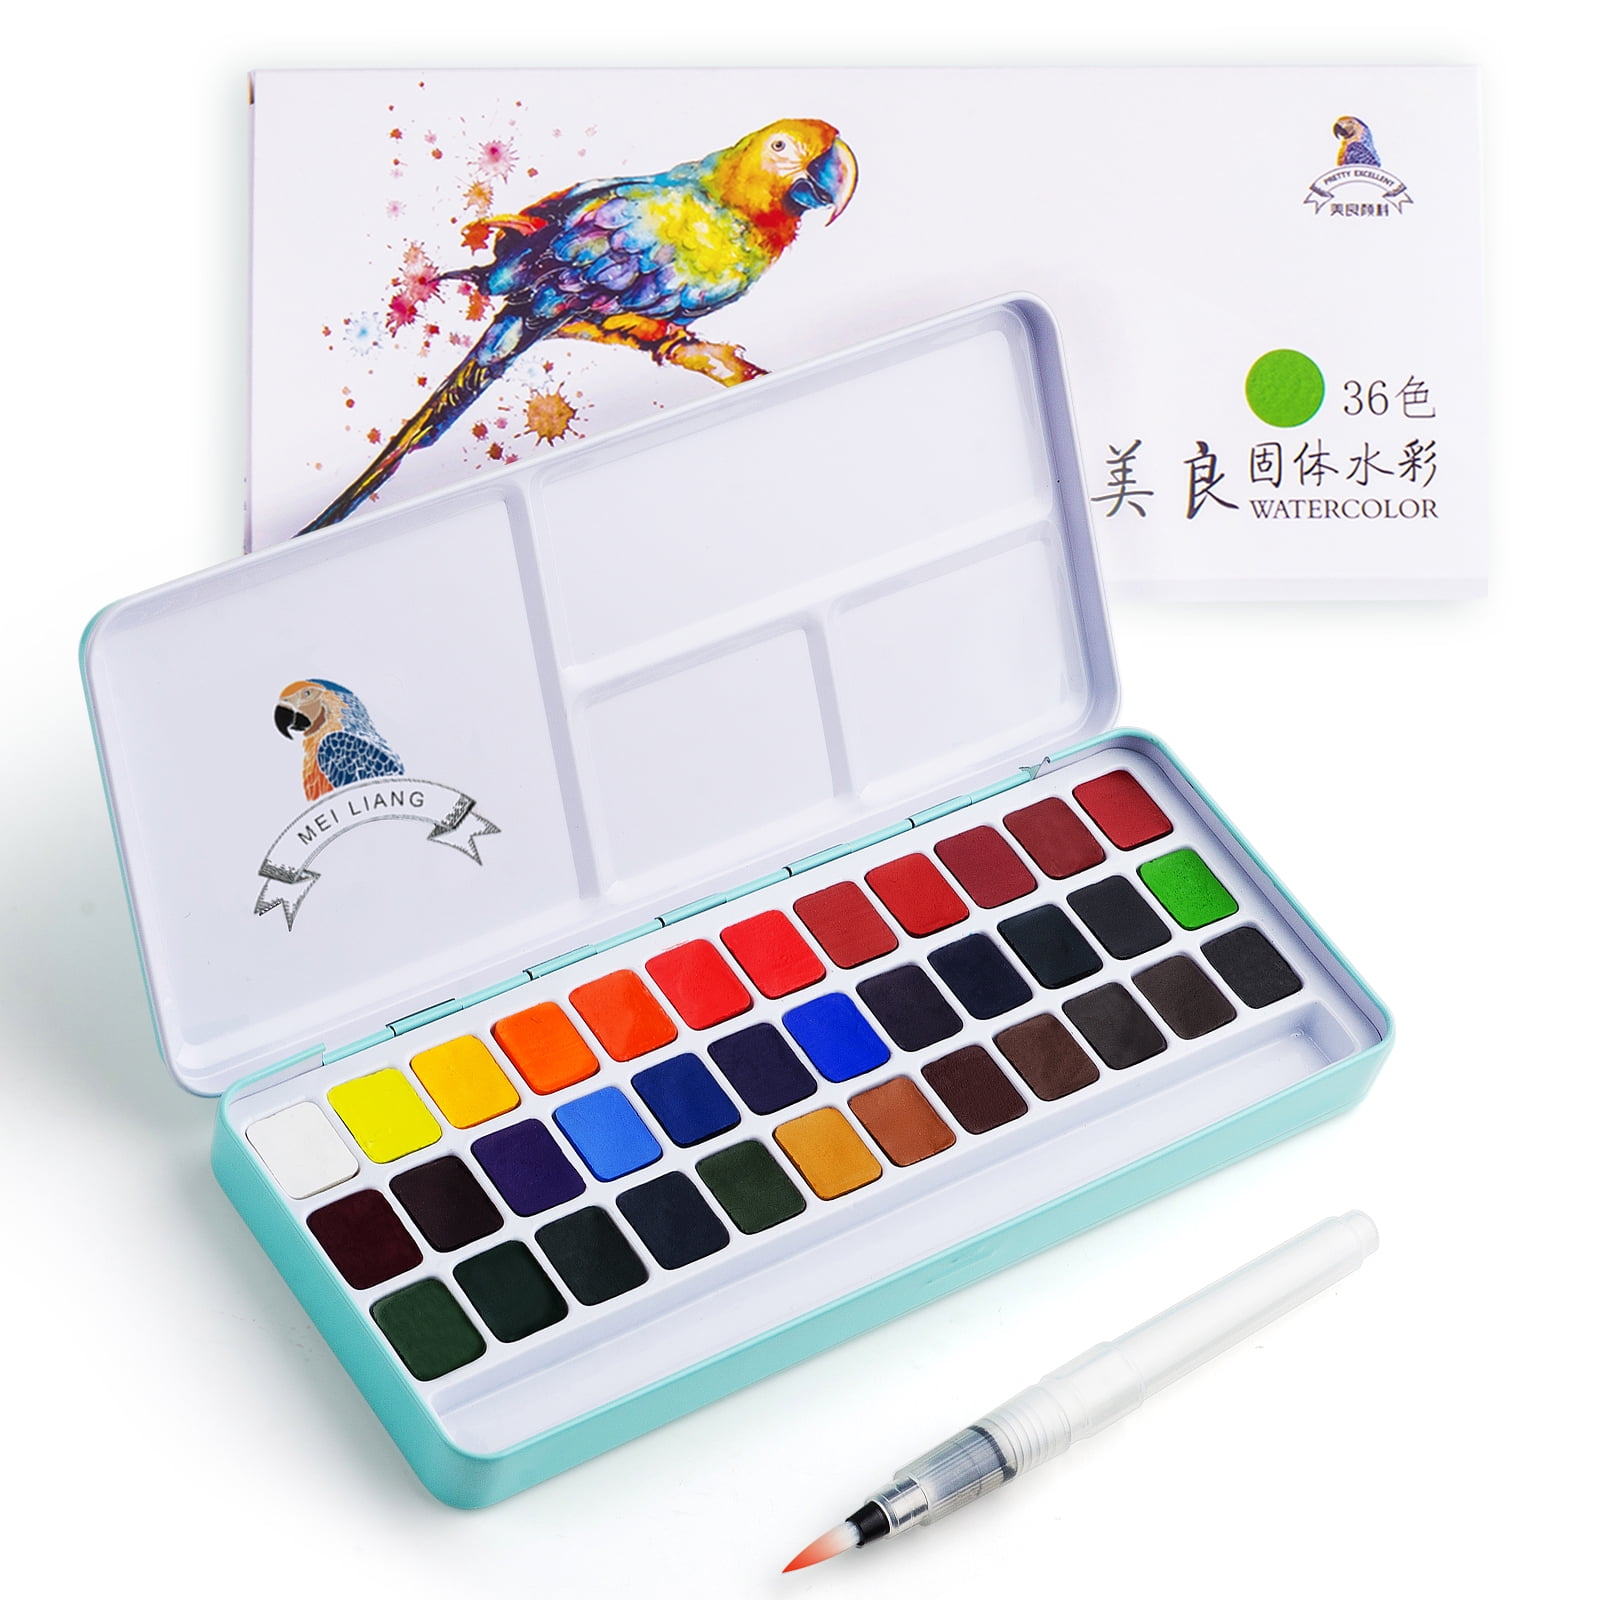 MeiLiang 24/36Colors Solid Watercolor Paint Pigment Set Portable Metal Box  for Beginner Students Drawing Art Supplies - AliExpress